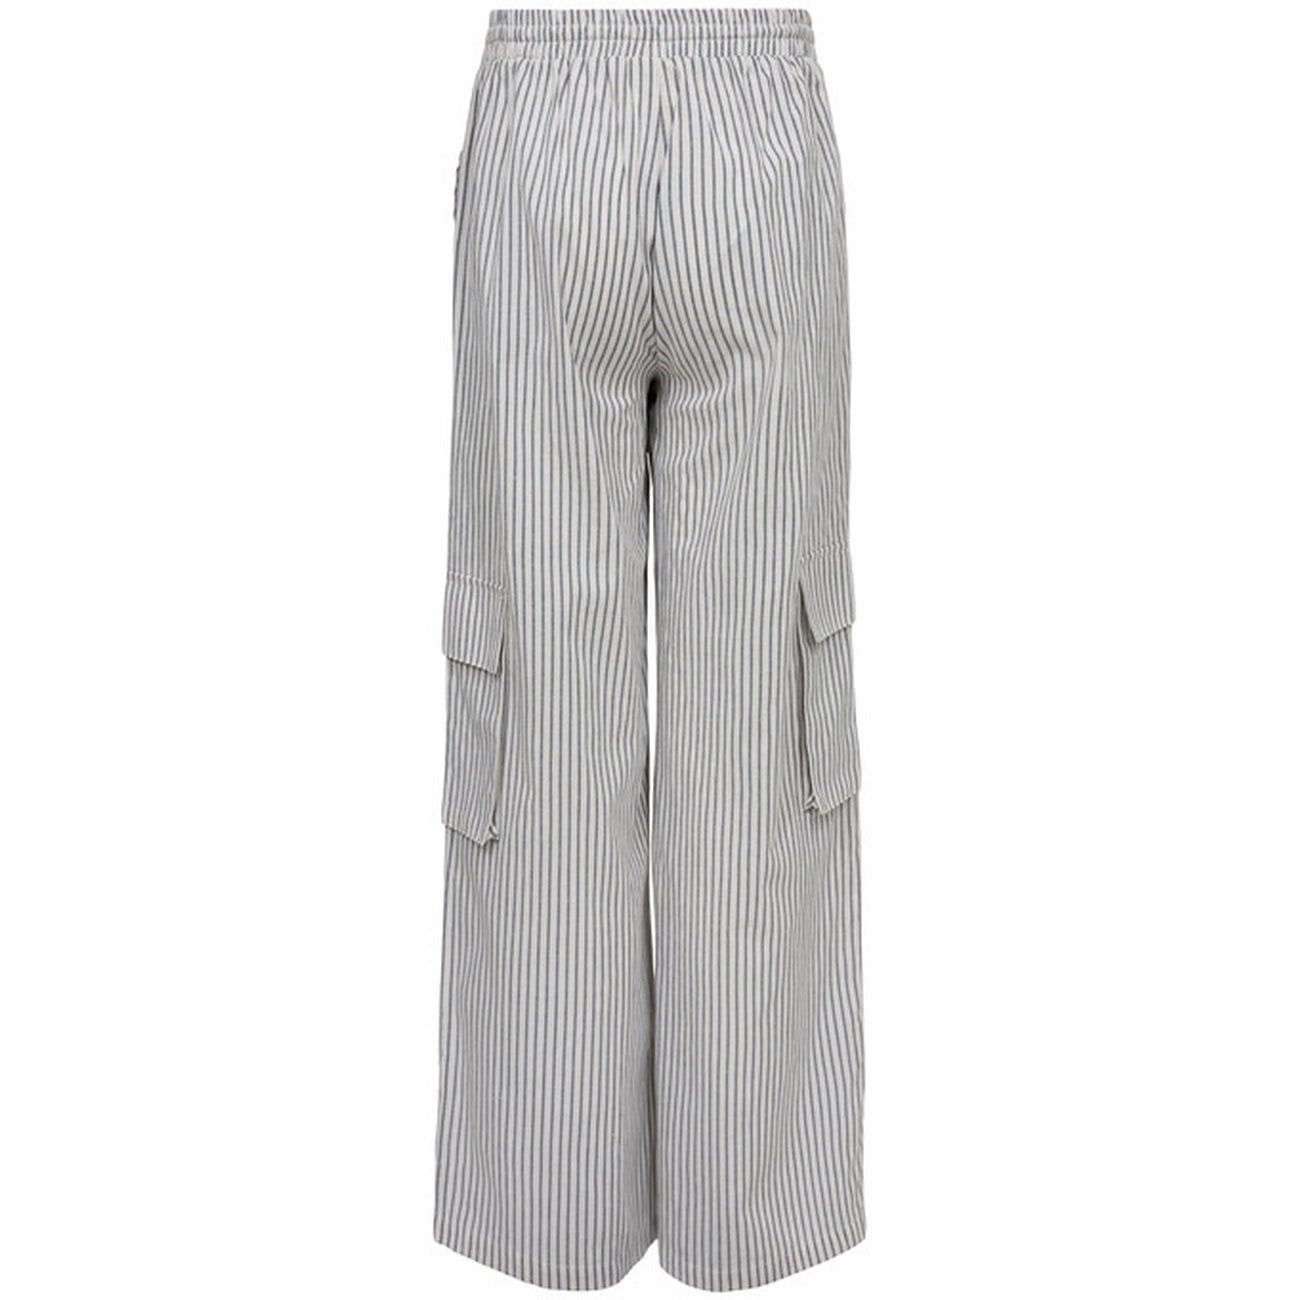 Sofie Schnoor Blue Striped Trousers 4